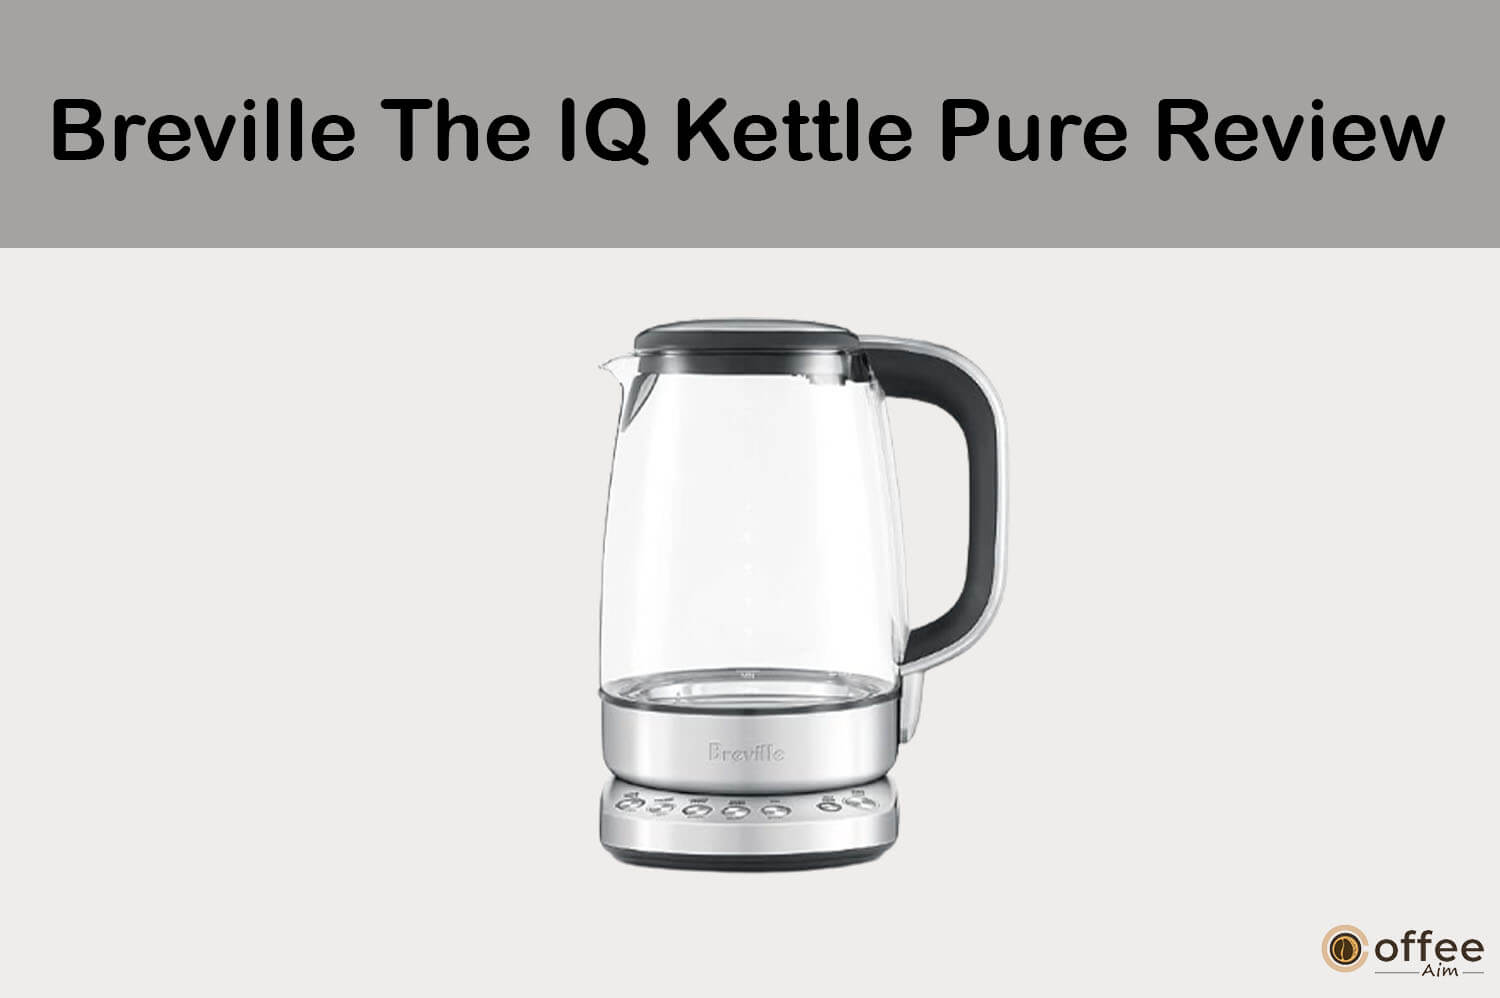 Featured image for the article '' Breville The IQ Kettle Pure Review''